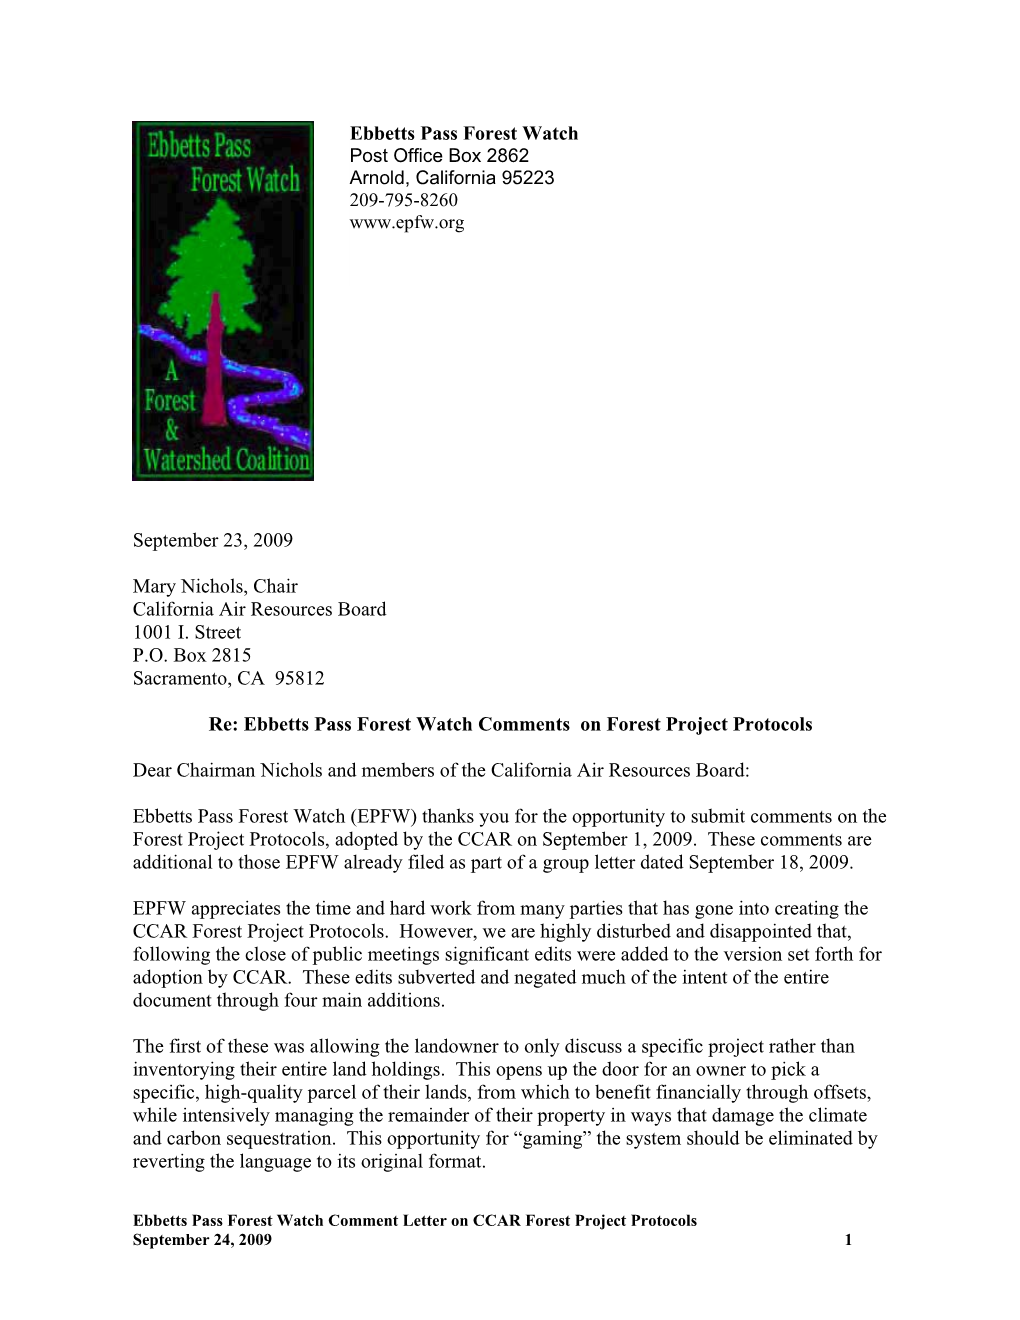 Re: Ebbetts Pass Forest Watchcomments on Forest Project Protocols